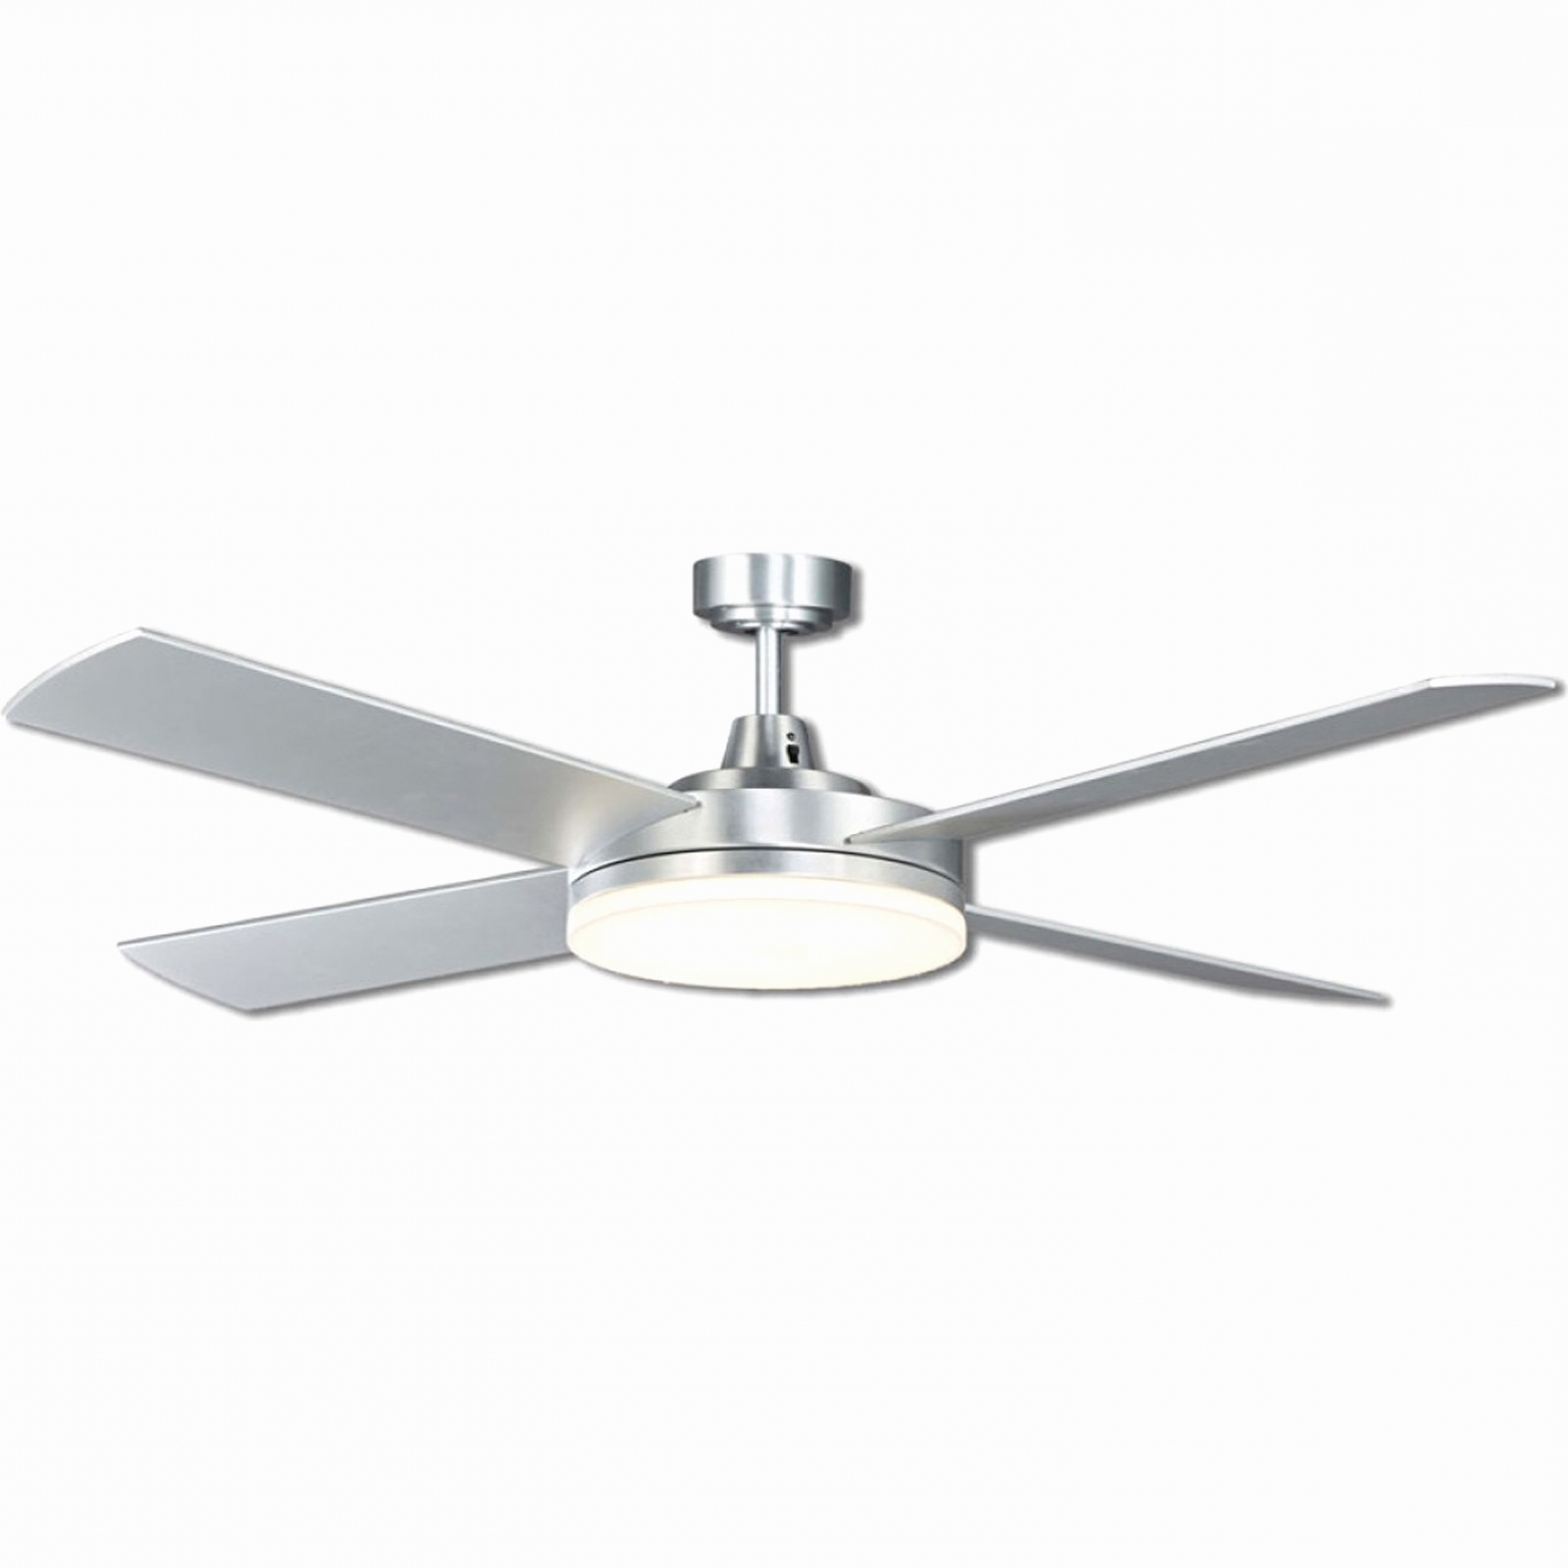 Low Profile Outdoor Ceiling Fans With Lights